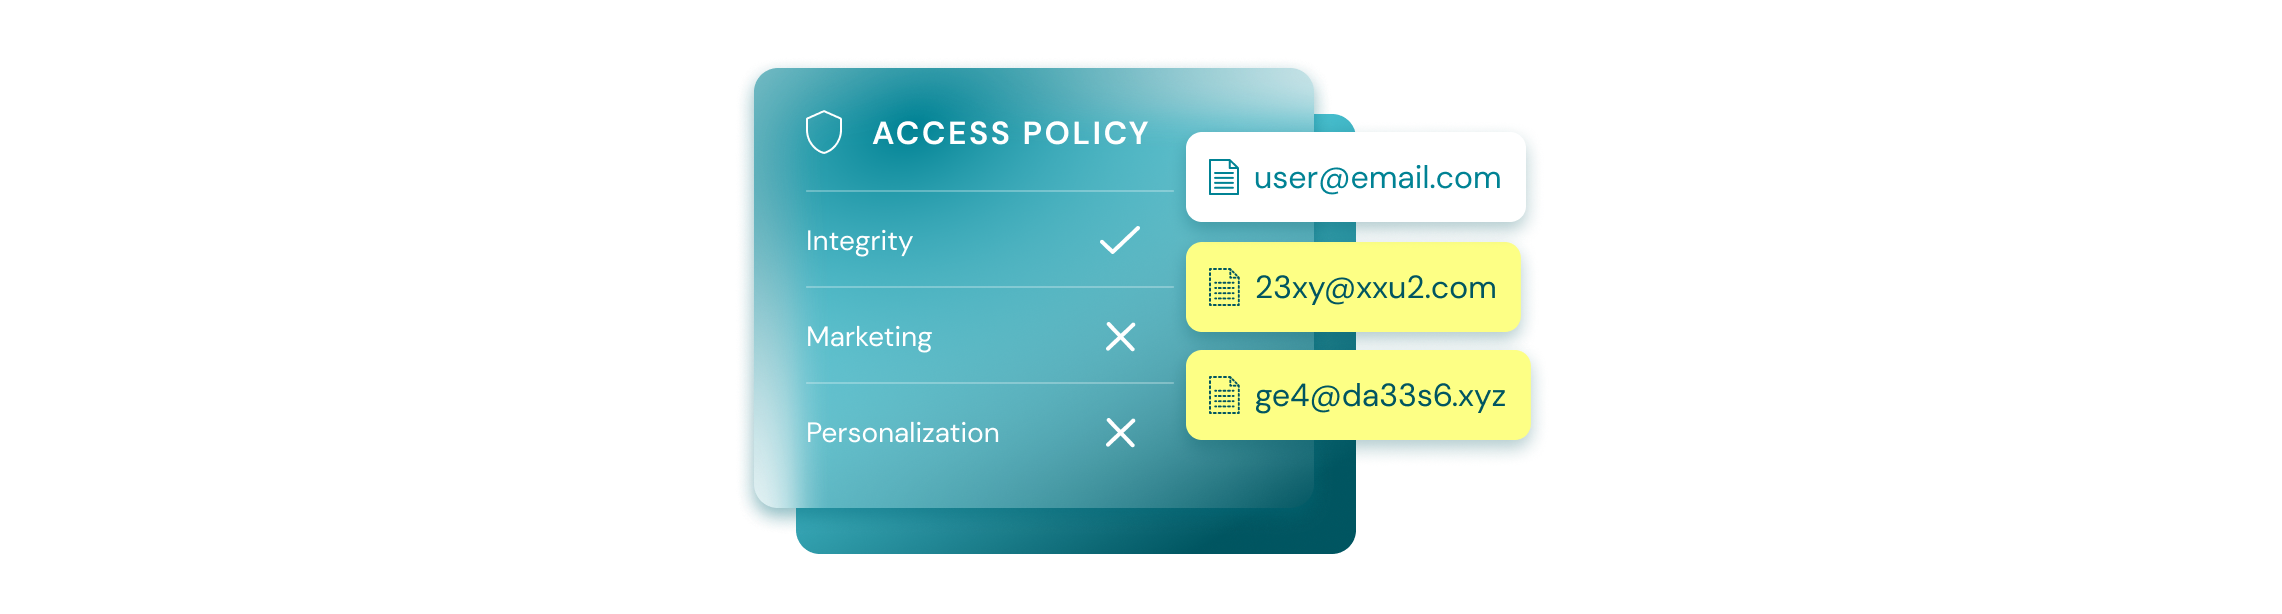 Access policies give you central, fine-grained control and visibility over sensitive data access. Policies can evaluate purpose, identity, authorization, location, expiration timelines and much more.